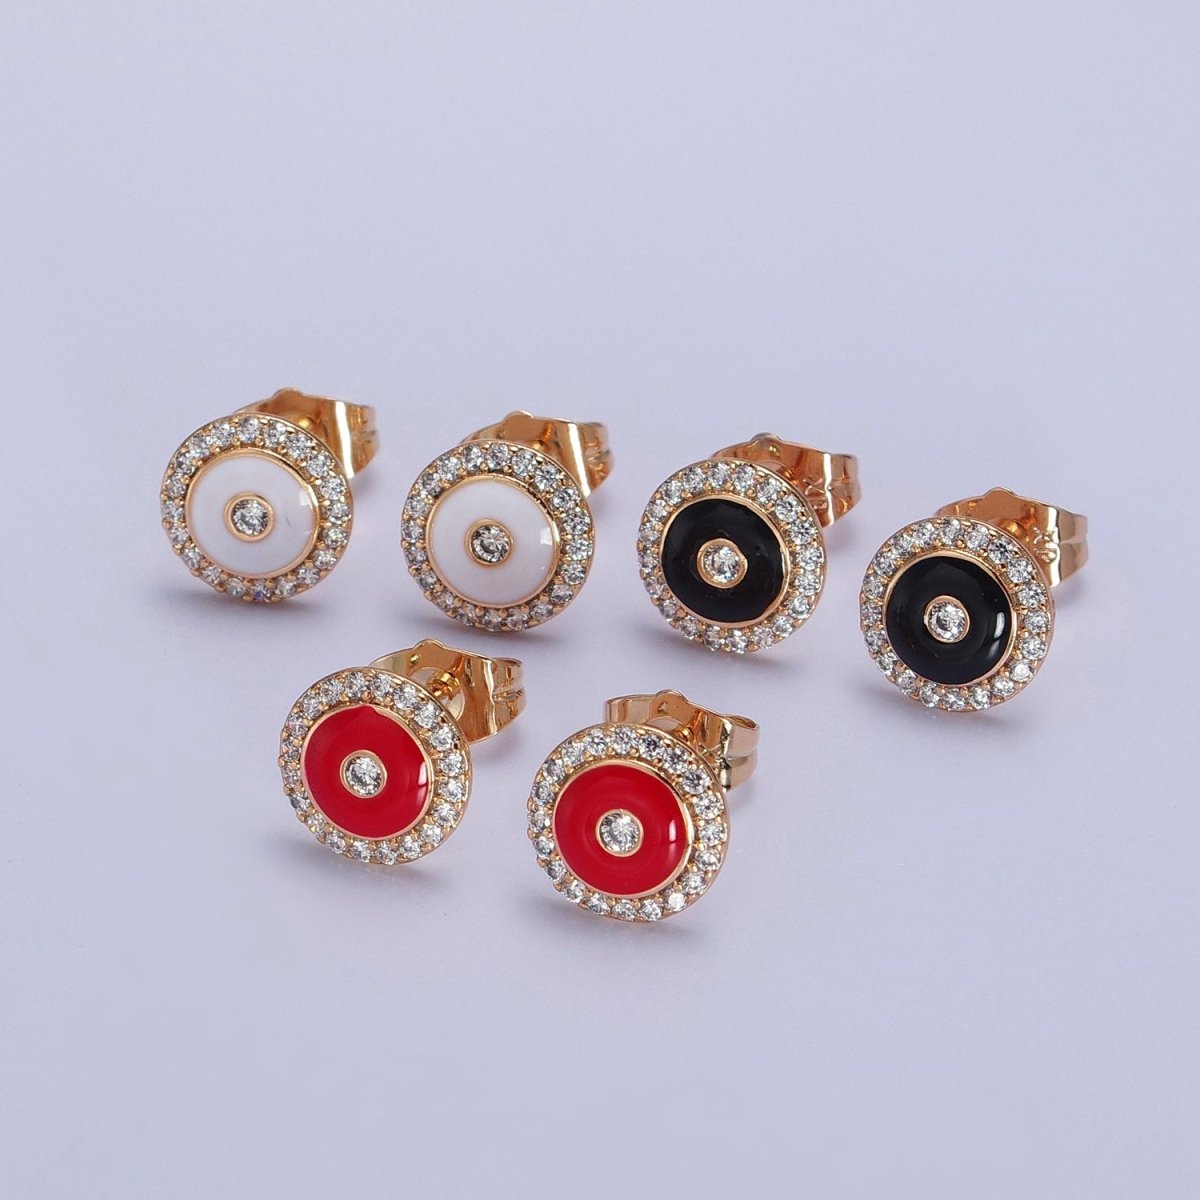 18K Gold Filled Black, Red, White Enamel Micro Paved CZ 10mm Round Stud Earrings | AB290 - AB292 - DLUXCA